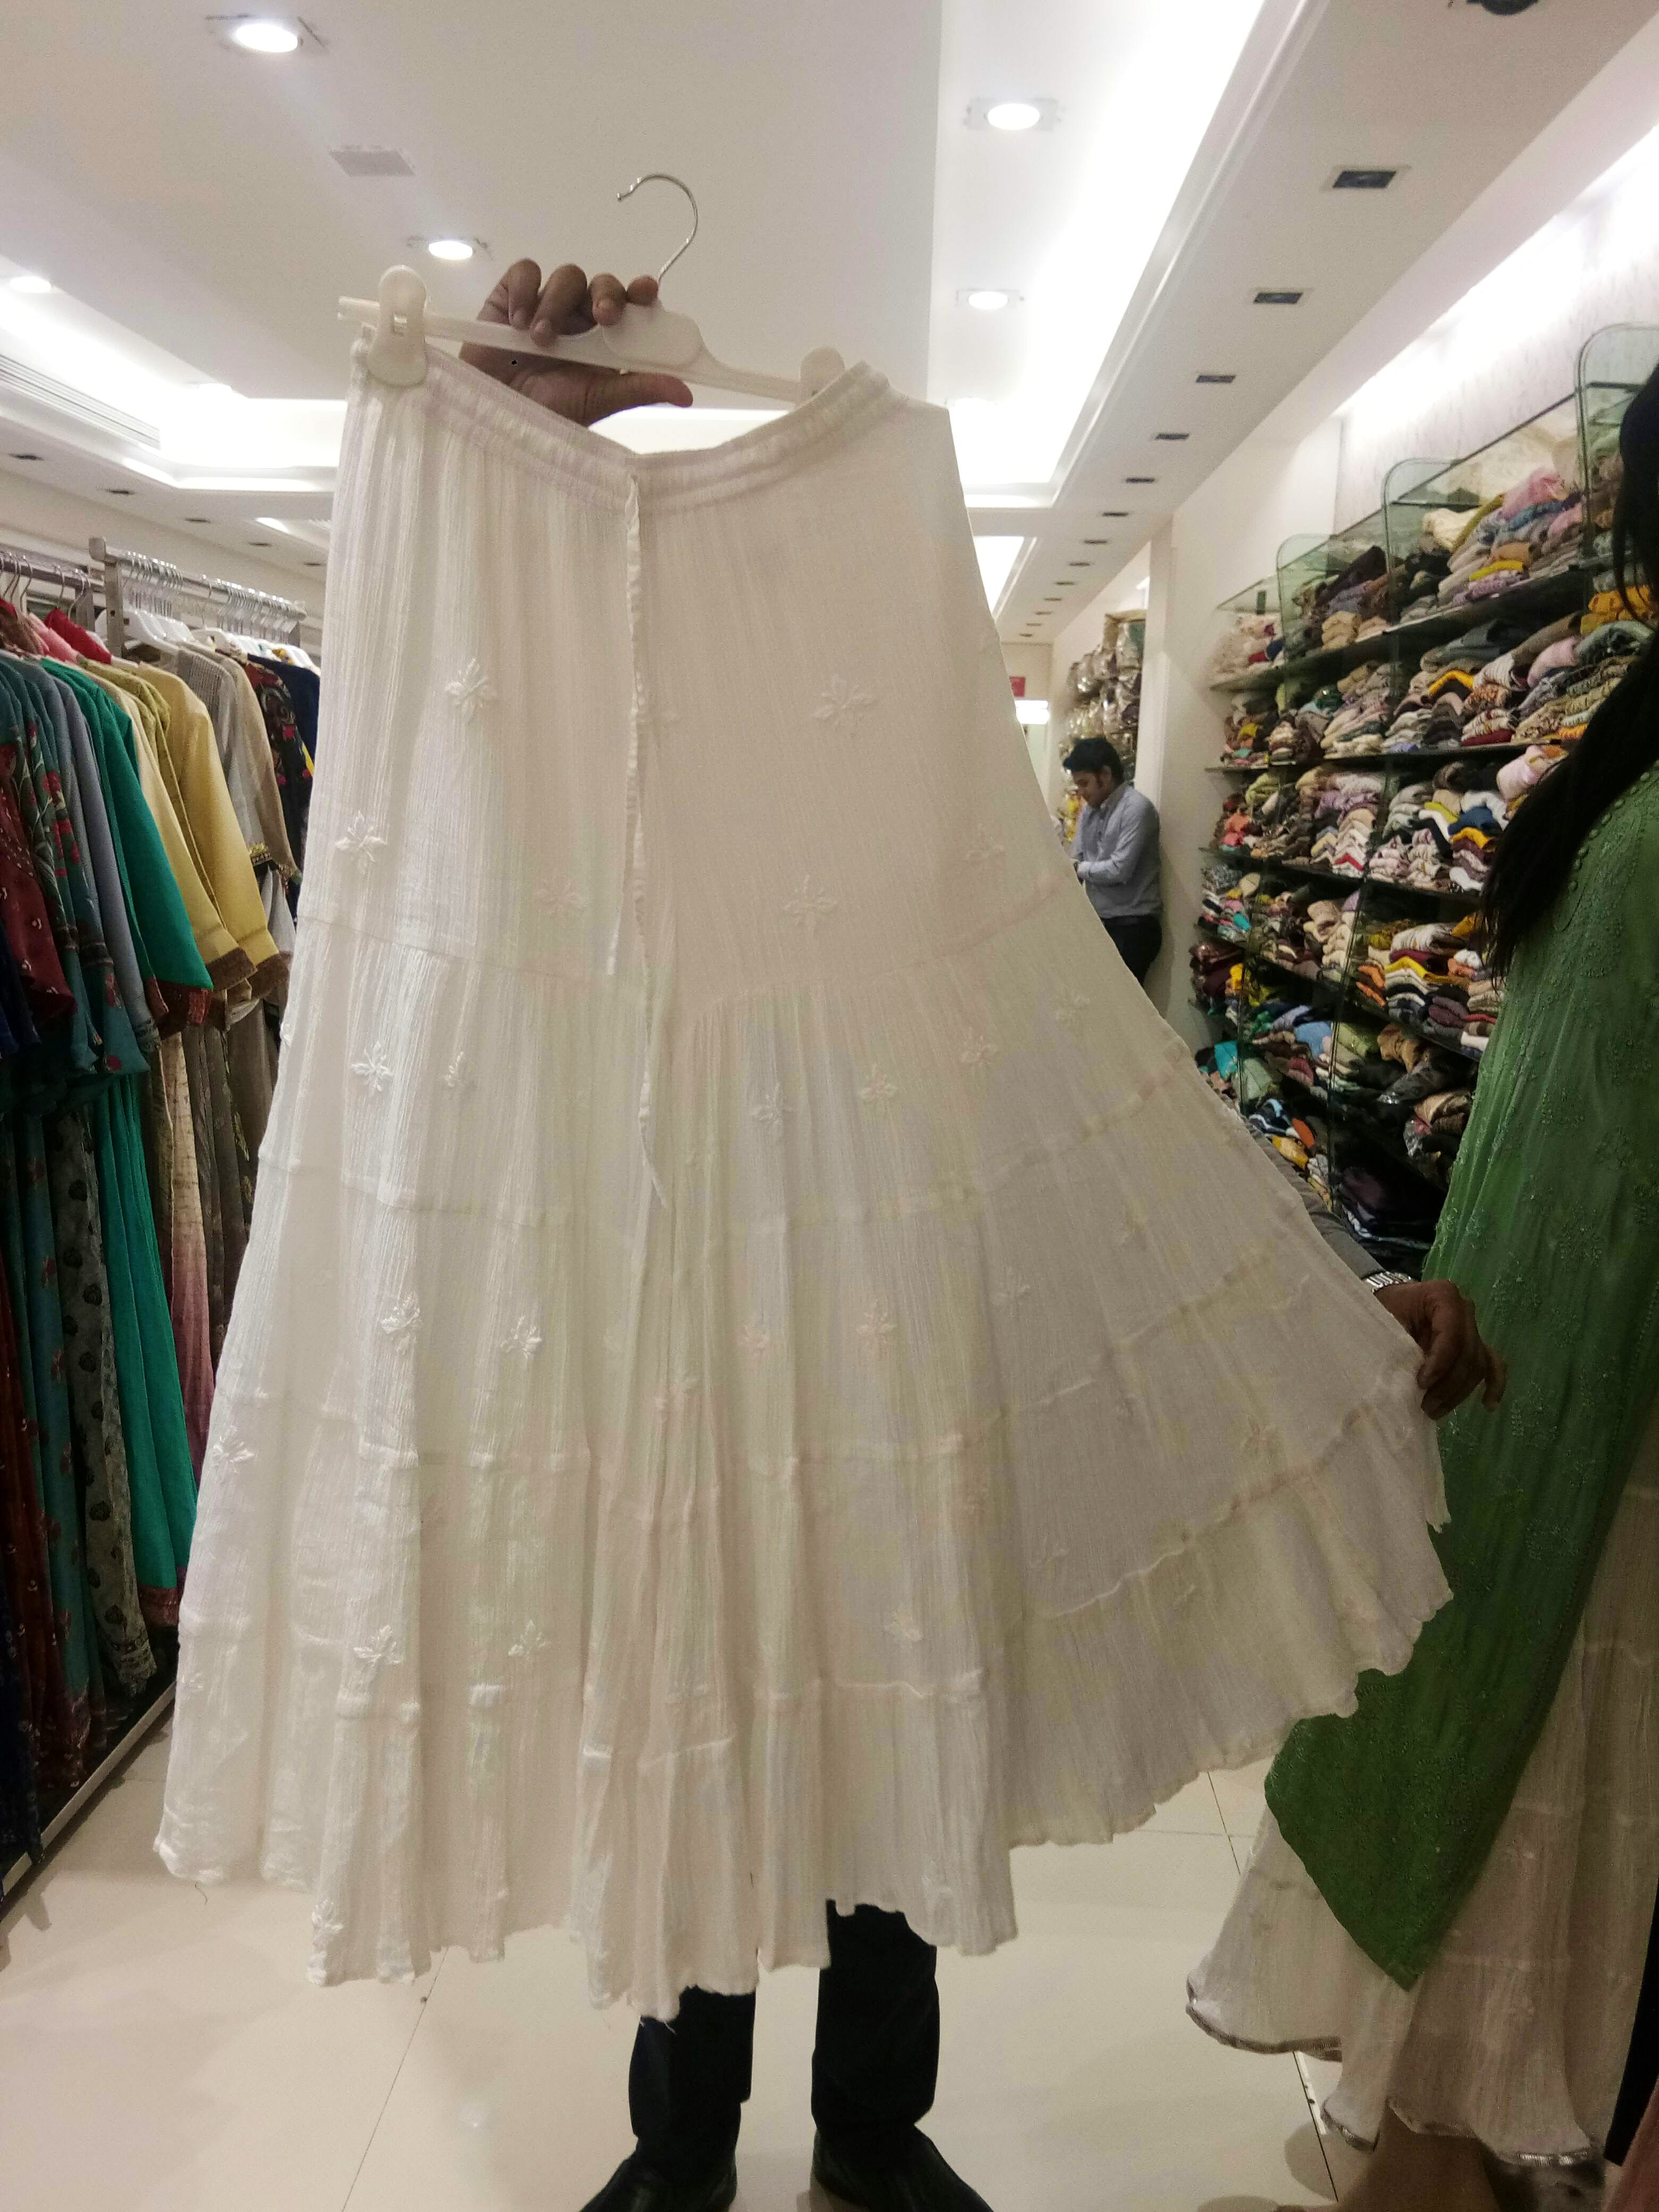 Shop From Options Fashion Mall In Juhu